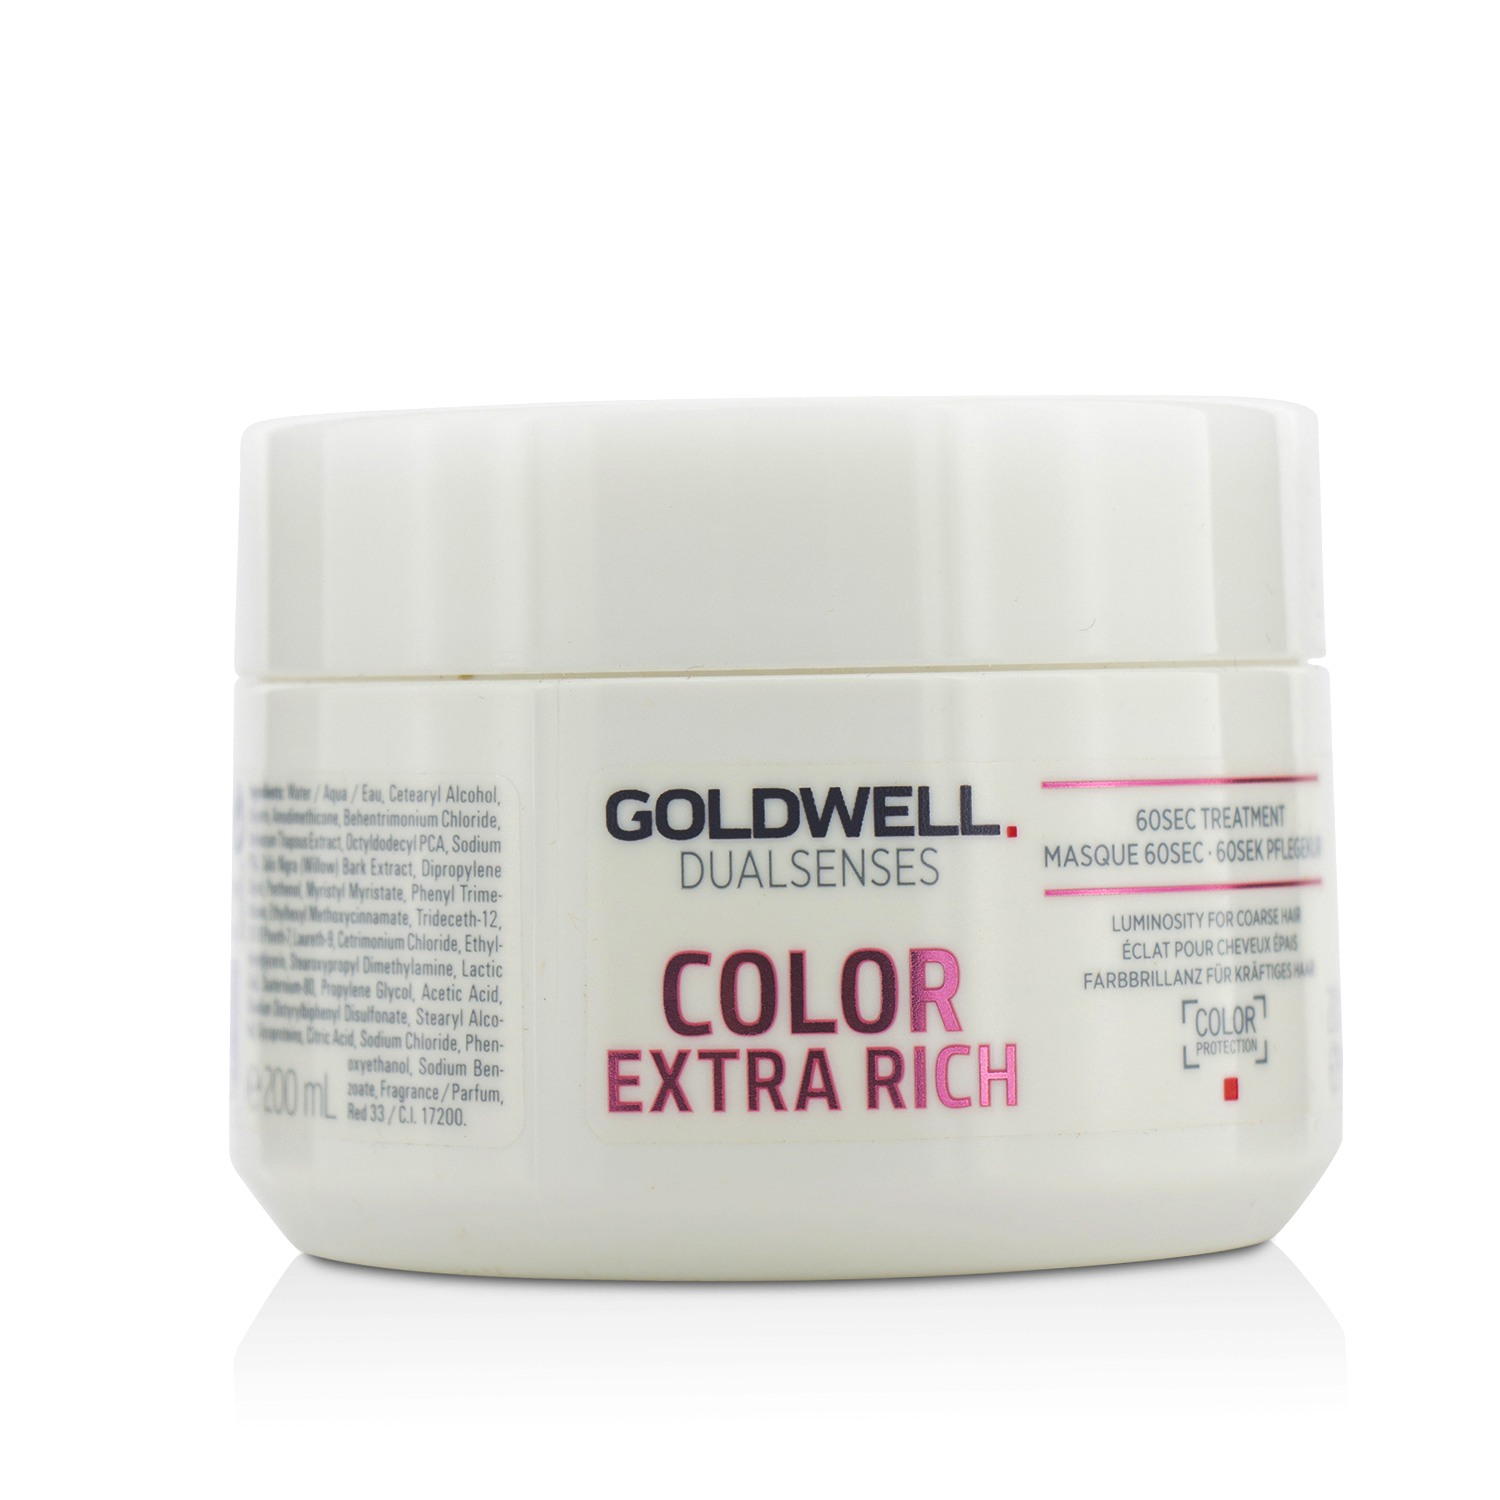 Dual Senses Color Extra Rich 60Sec Treatment (Luminosity For Coarse Hair) Goldwell Image